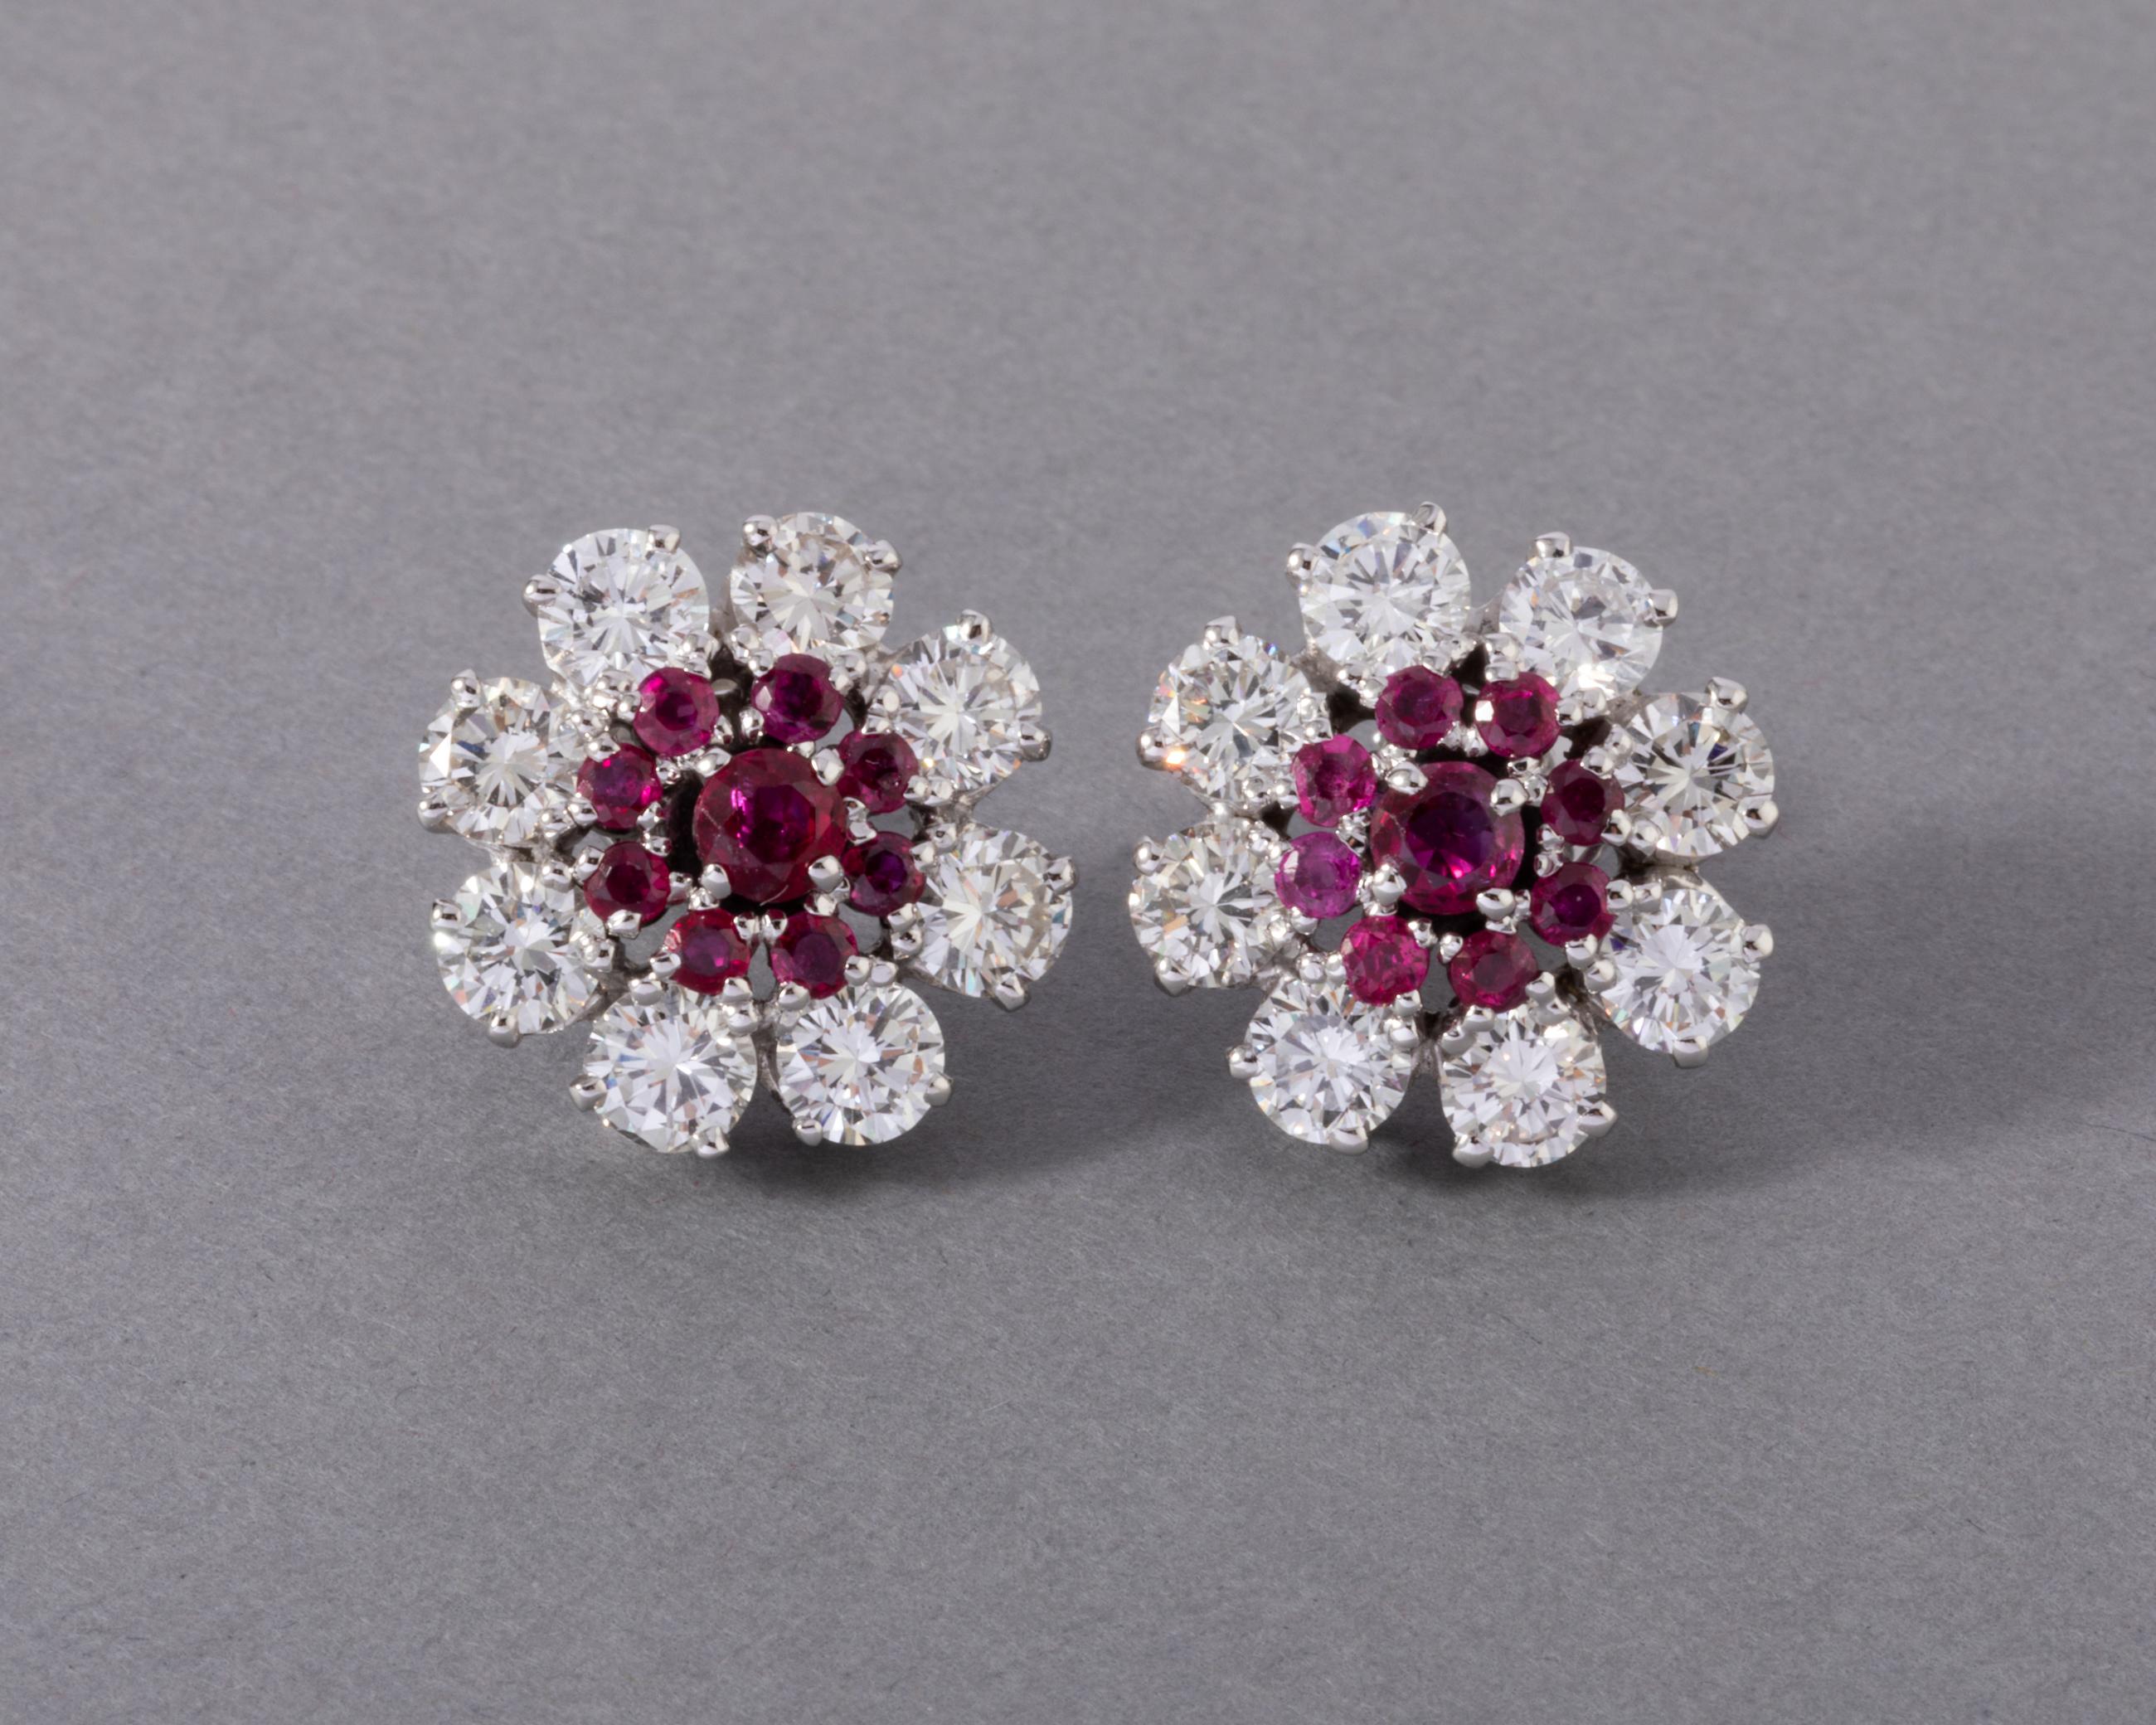 One very beautiful pair of earrings.
Made in white gold 18k (hallmarks 750).
The diamonds are top quality, they weight 0.25/0.30 each, 2 carats at least per earring. They are brilliant cut.
The rubies weights 0.50 carats per earring